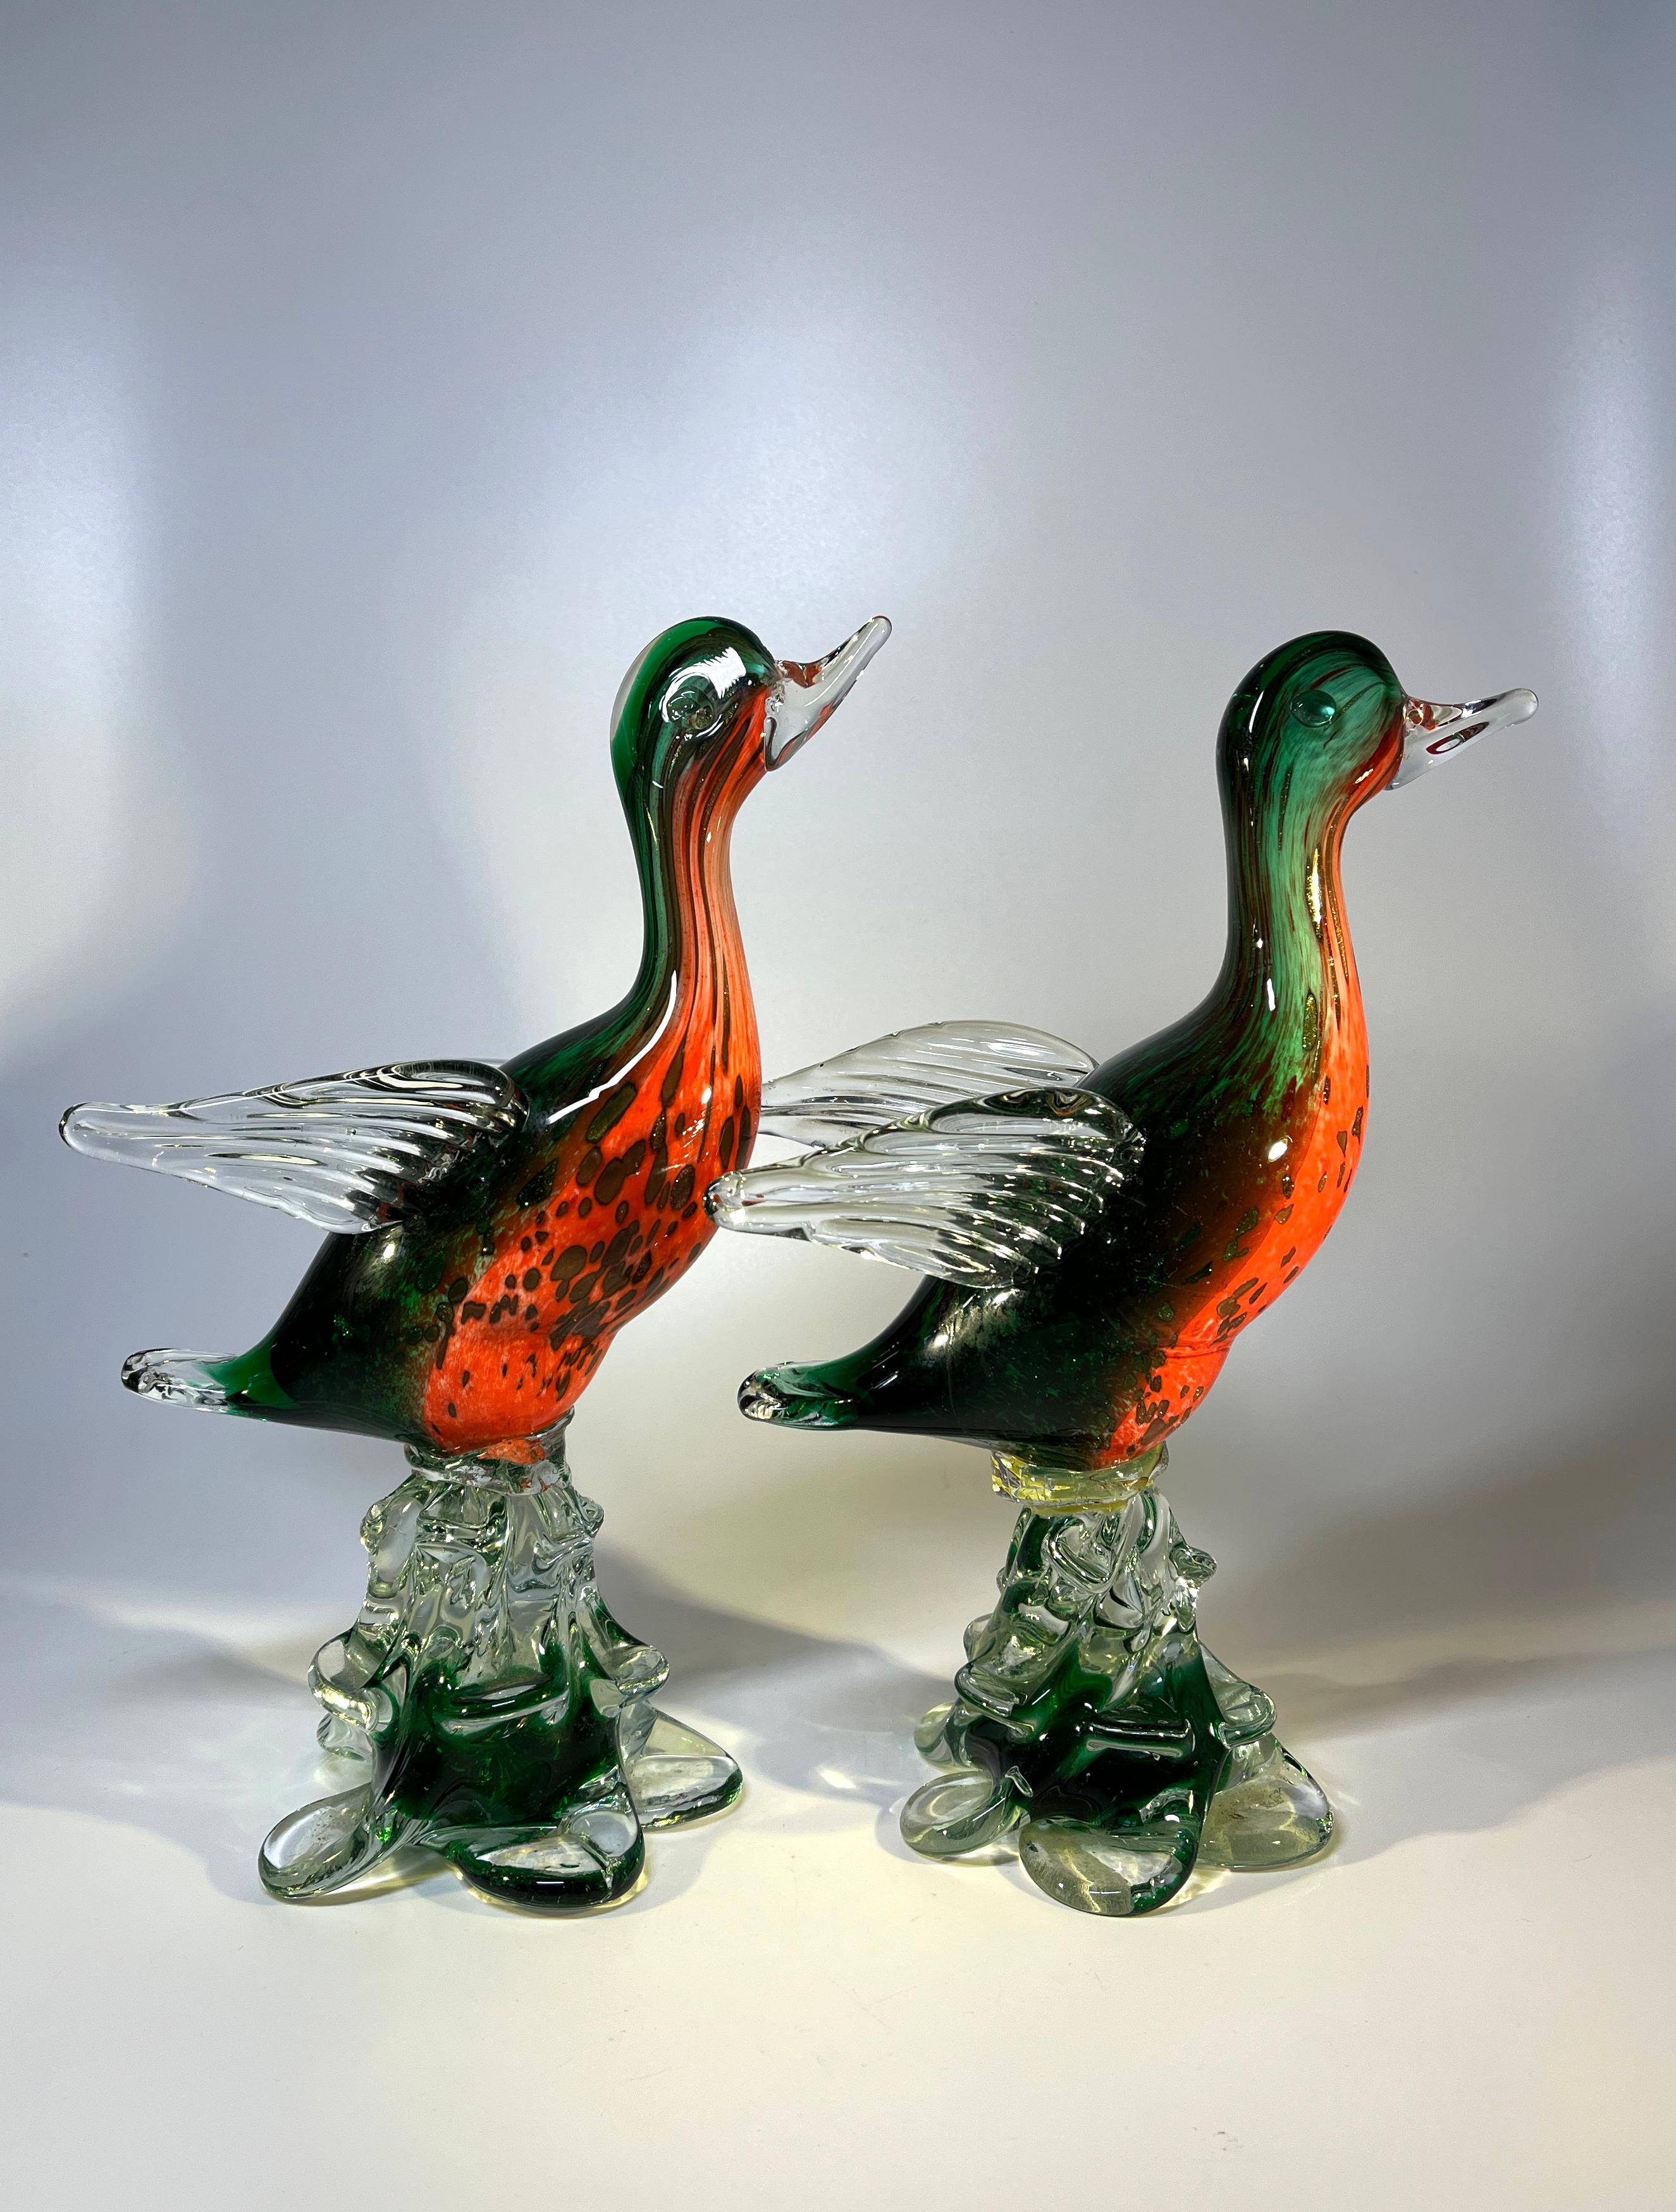 Handsome Pair of Vintage Venetian Glass Birds, Murano Hand Blown circa 1960s For Sale 1